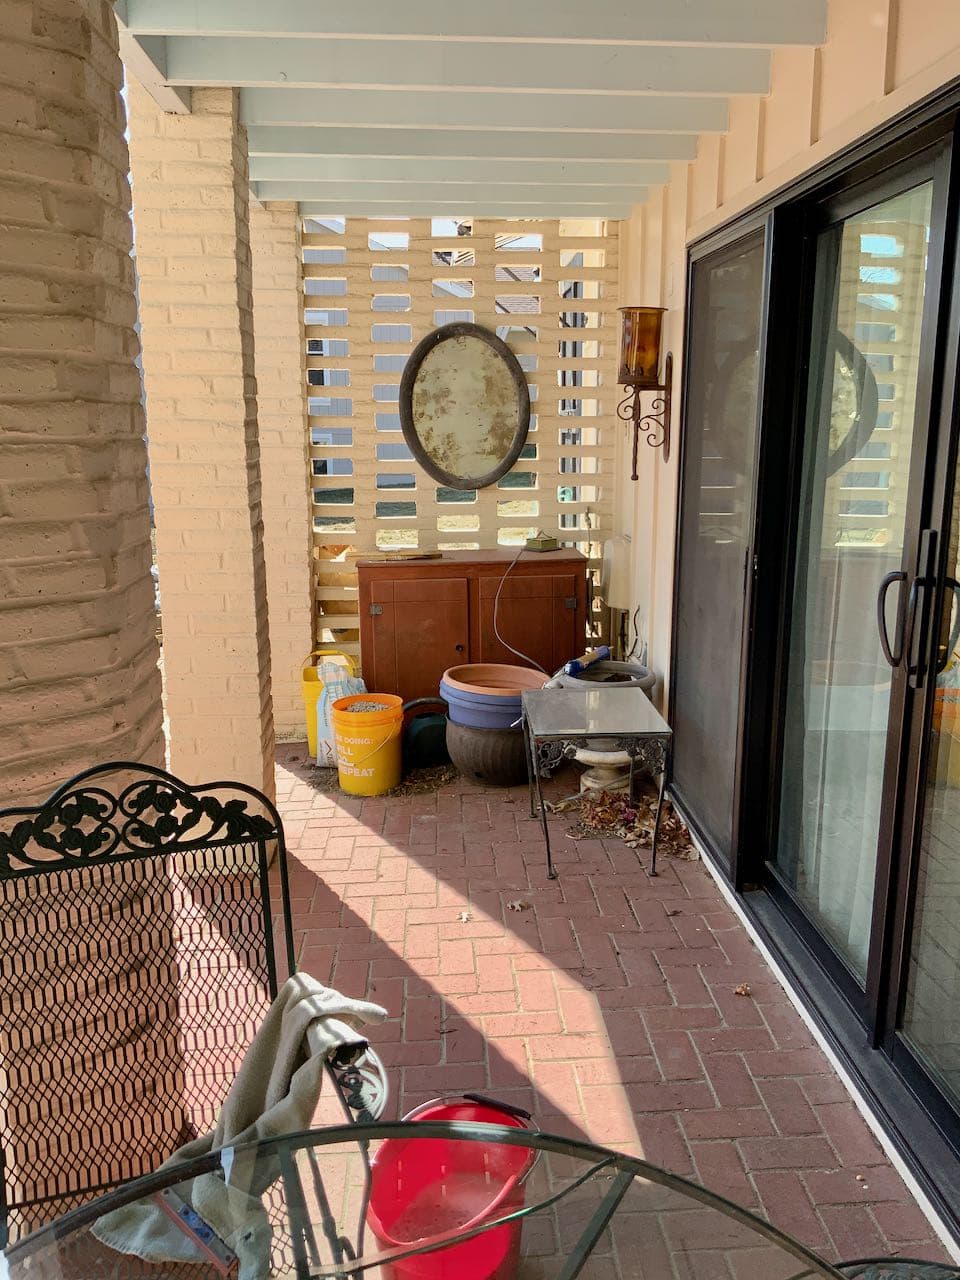 long view of corner of patio with red brick floor and a jumble of "stuff" accumulated 